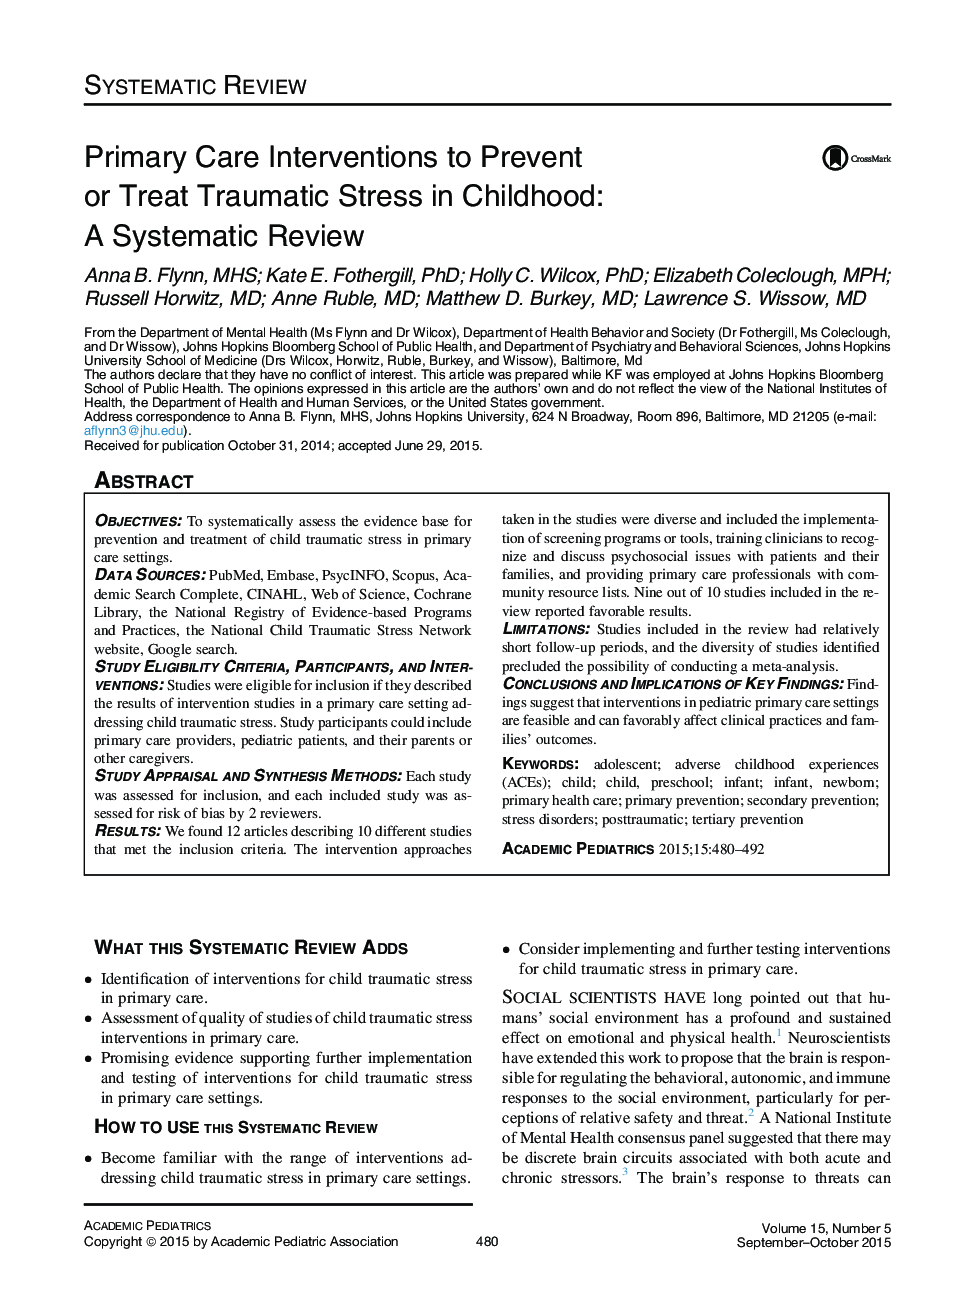 Primary Care Interventions to Prevent or Treat Traumatic Stress in Childhood: A Systematic Review 